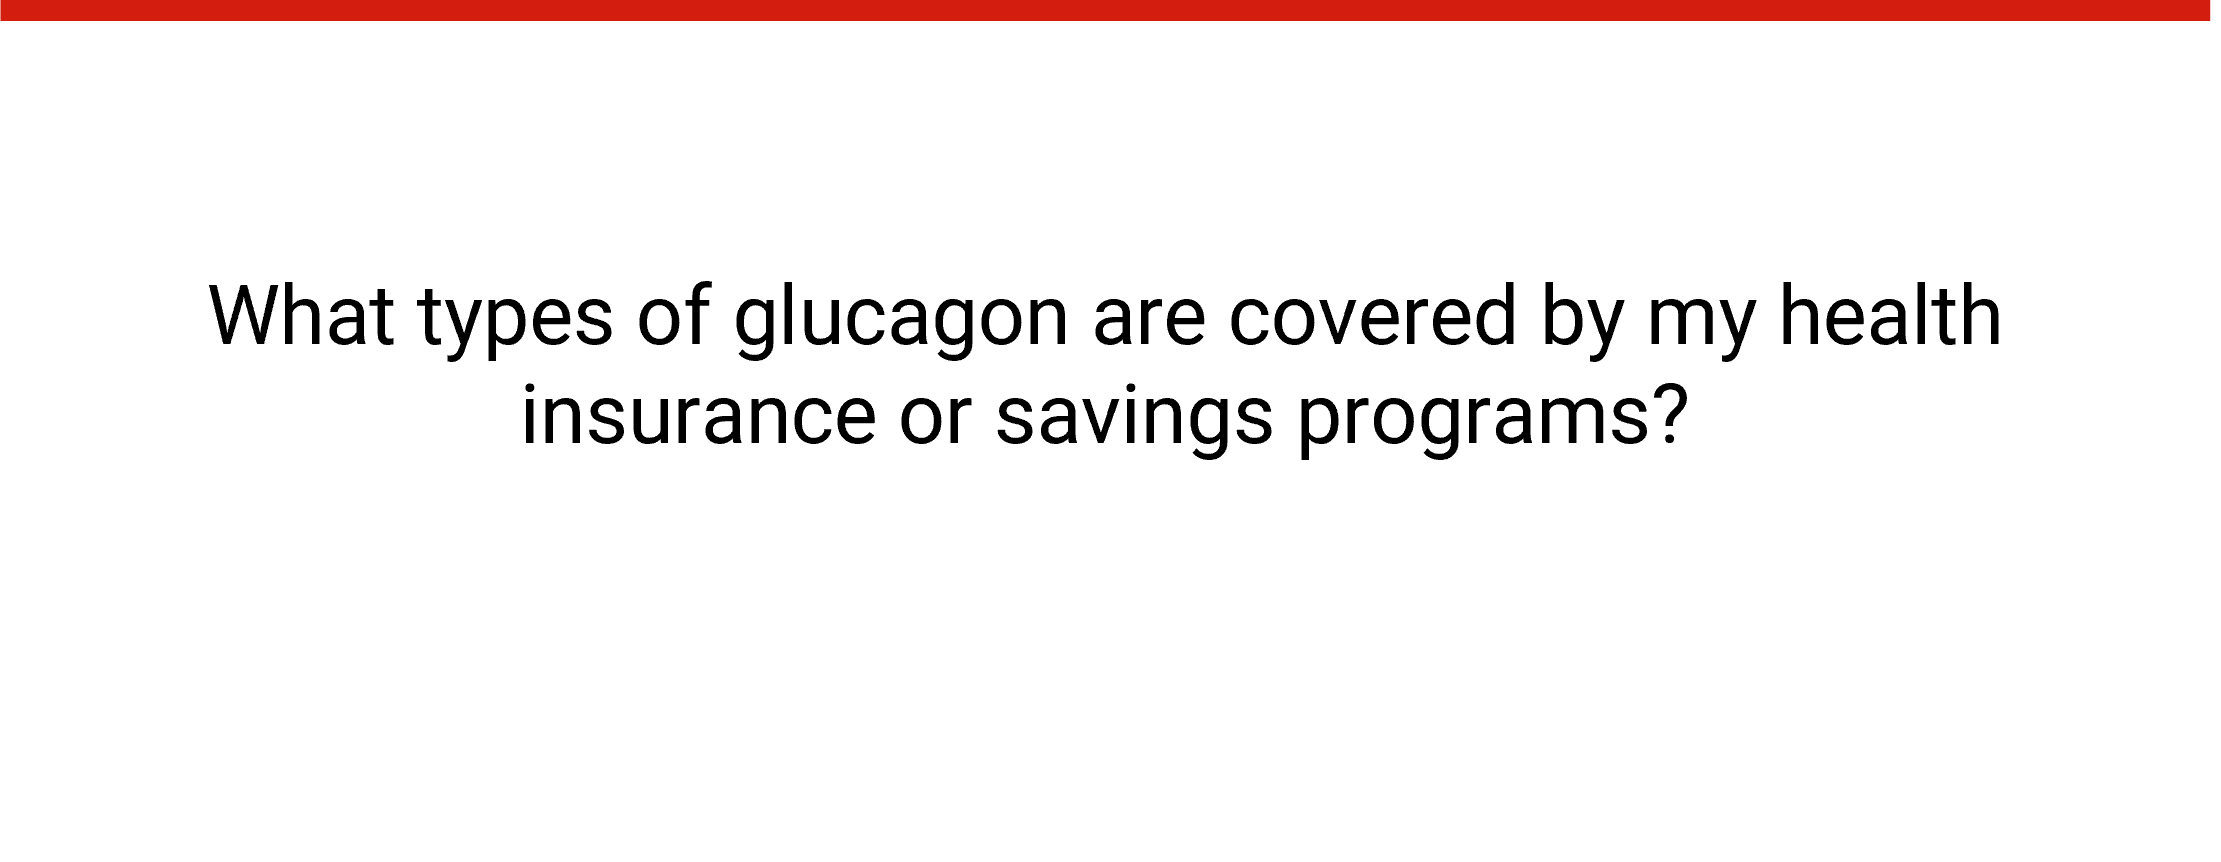 speech bubble: What types of glucagon are covered by my health insurance or savings programs